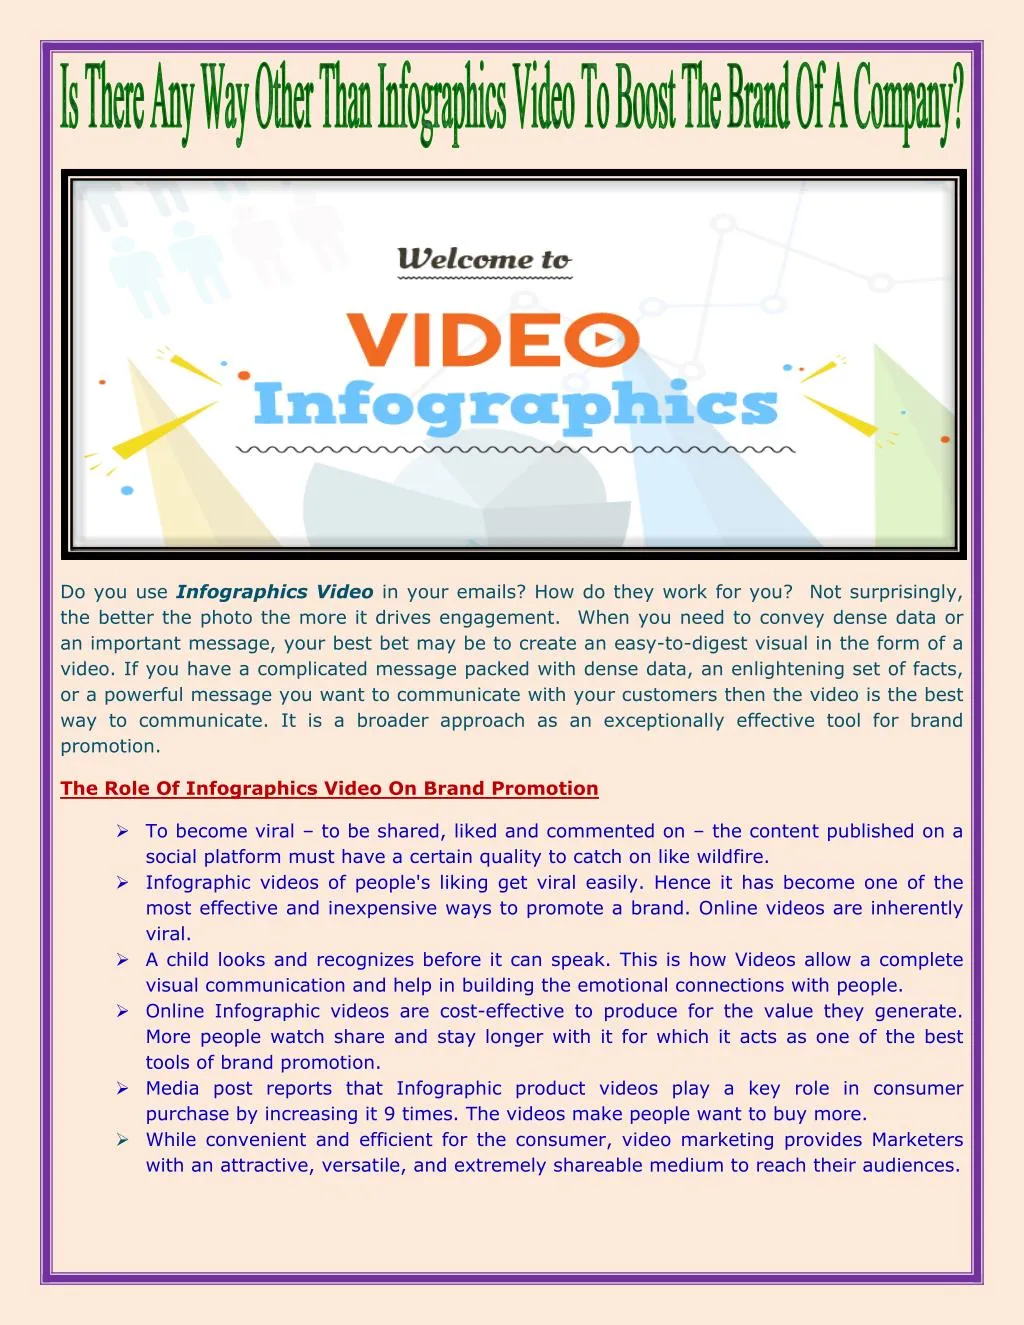 do you use infographics video in your emails